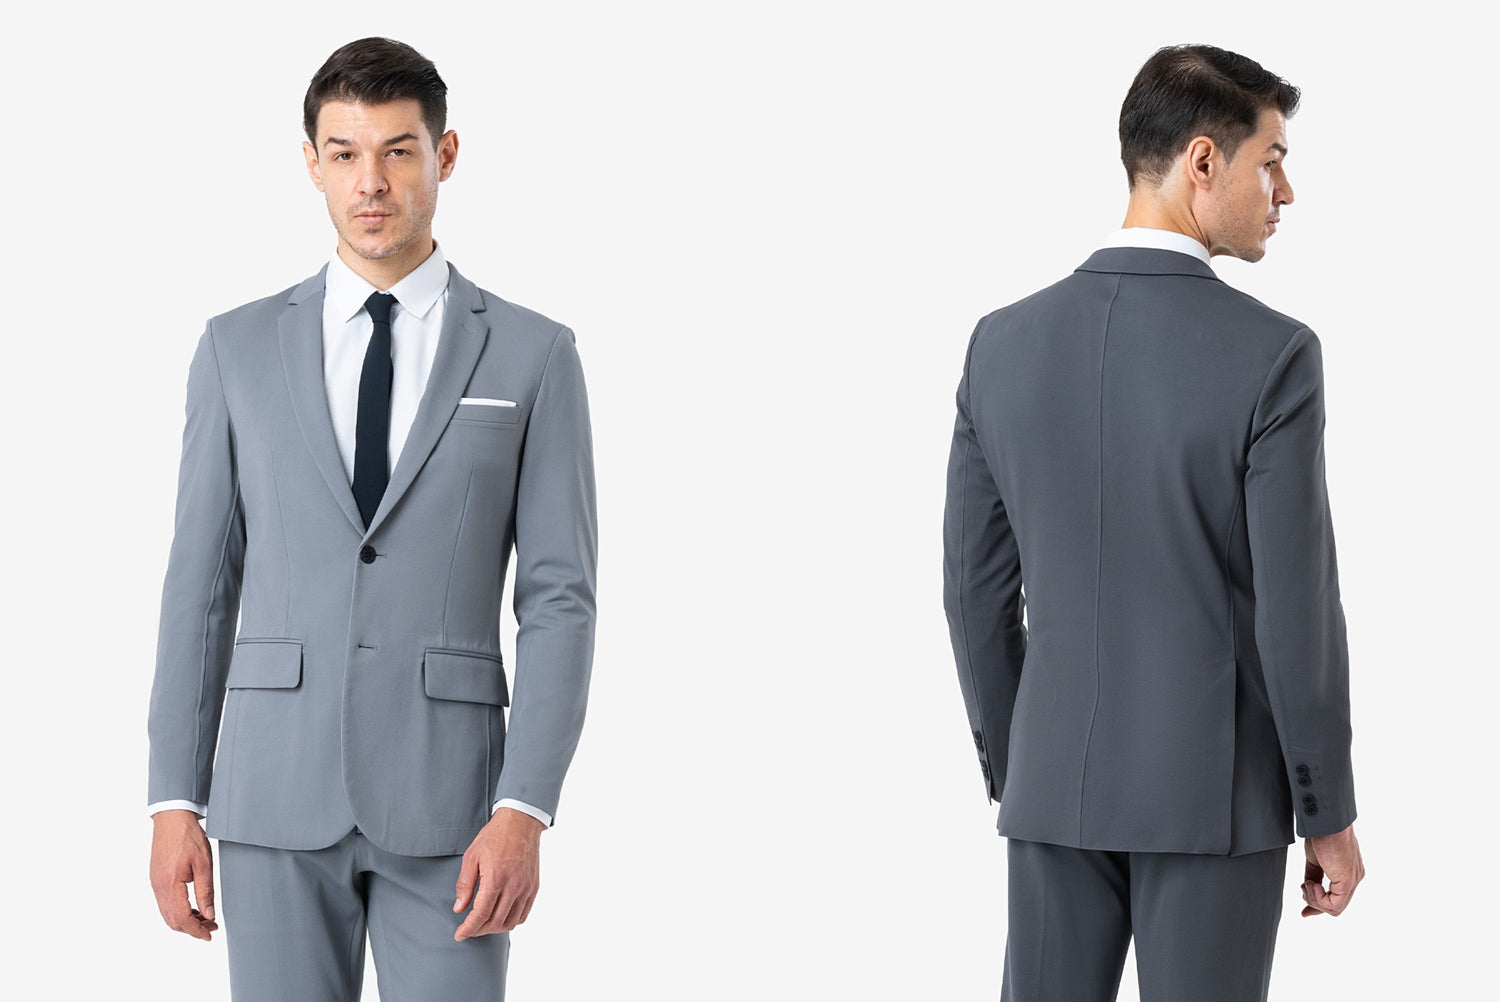 How to Perfectly Style a Dark or Light Grey Suit